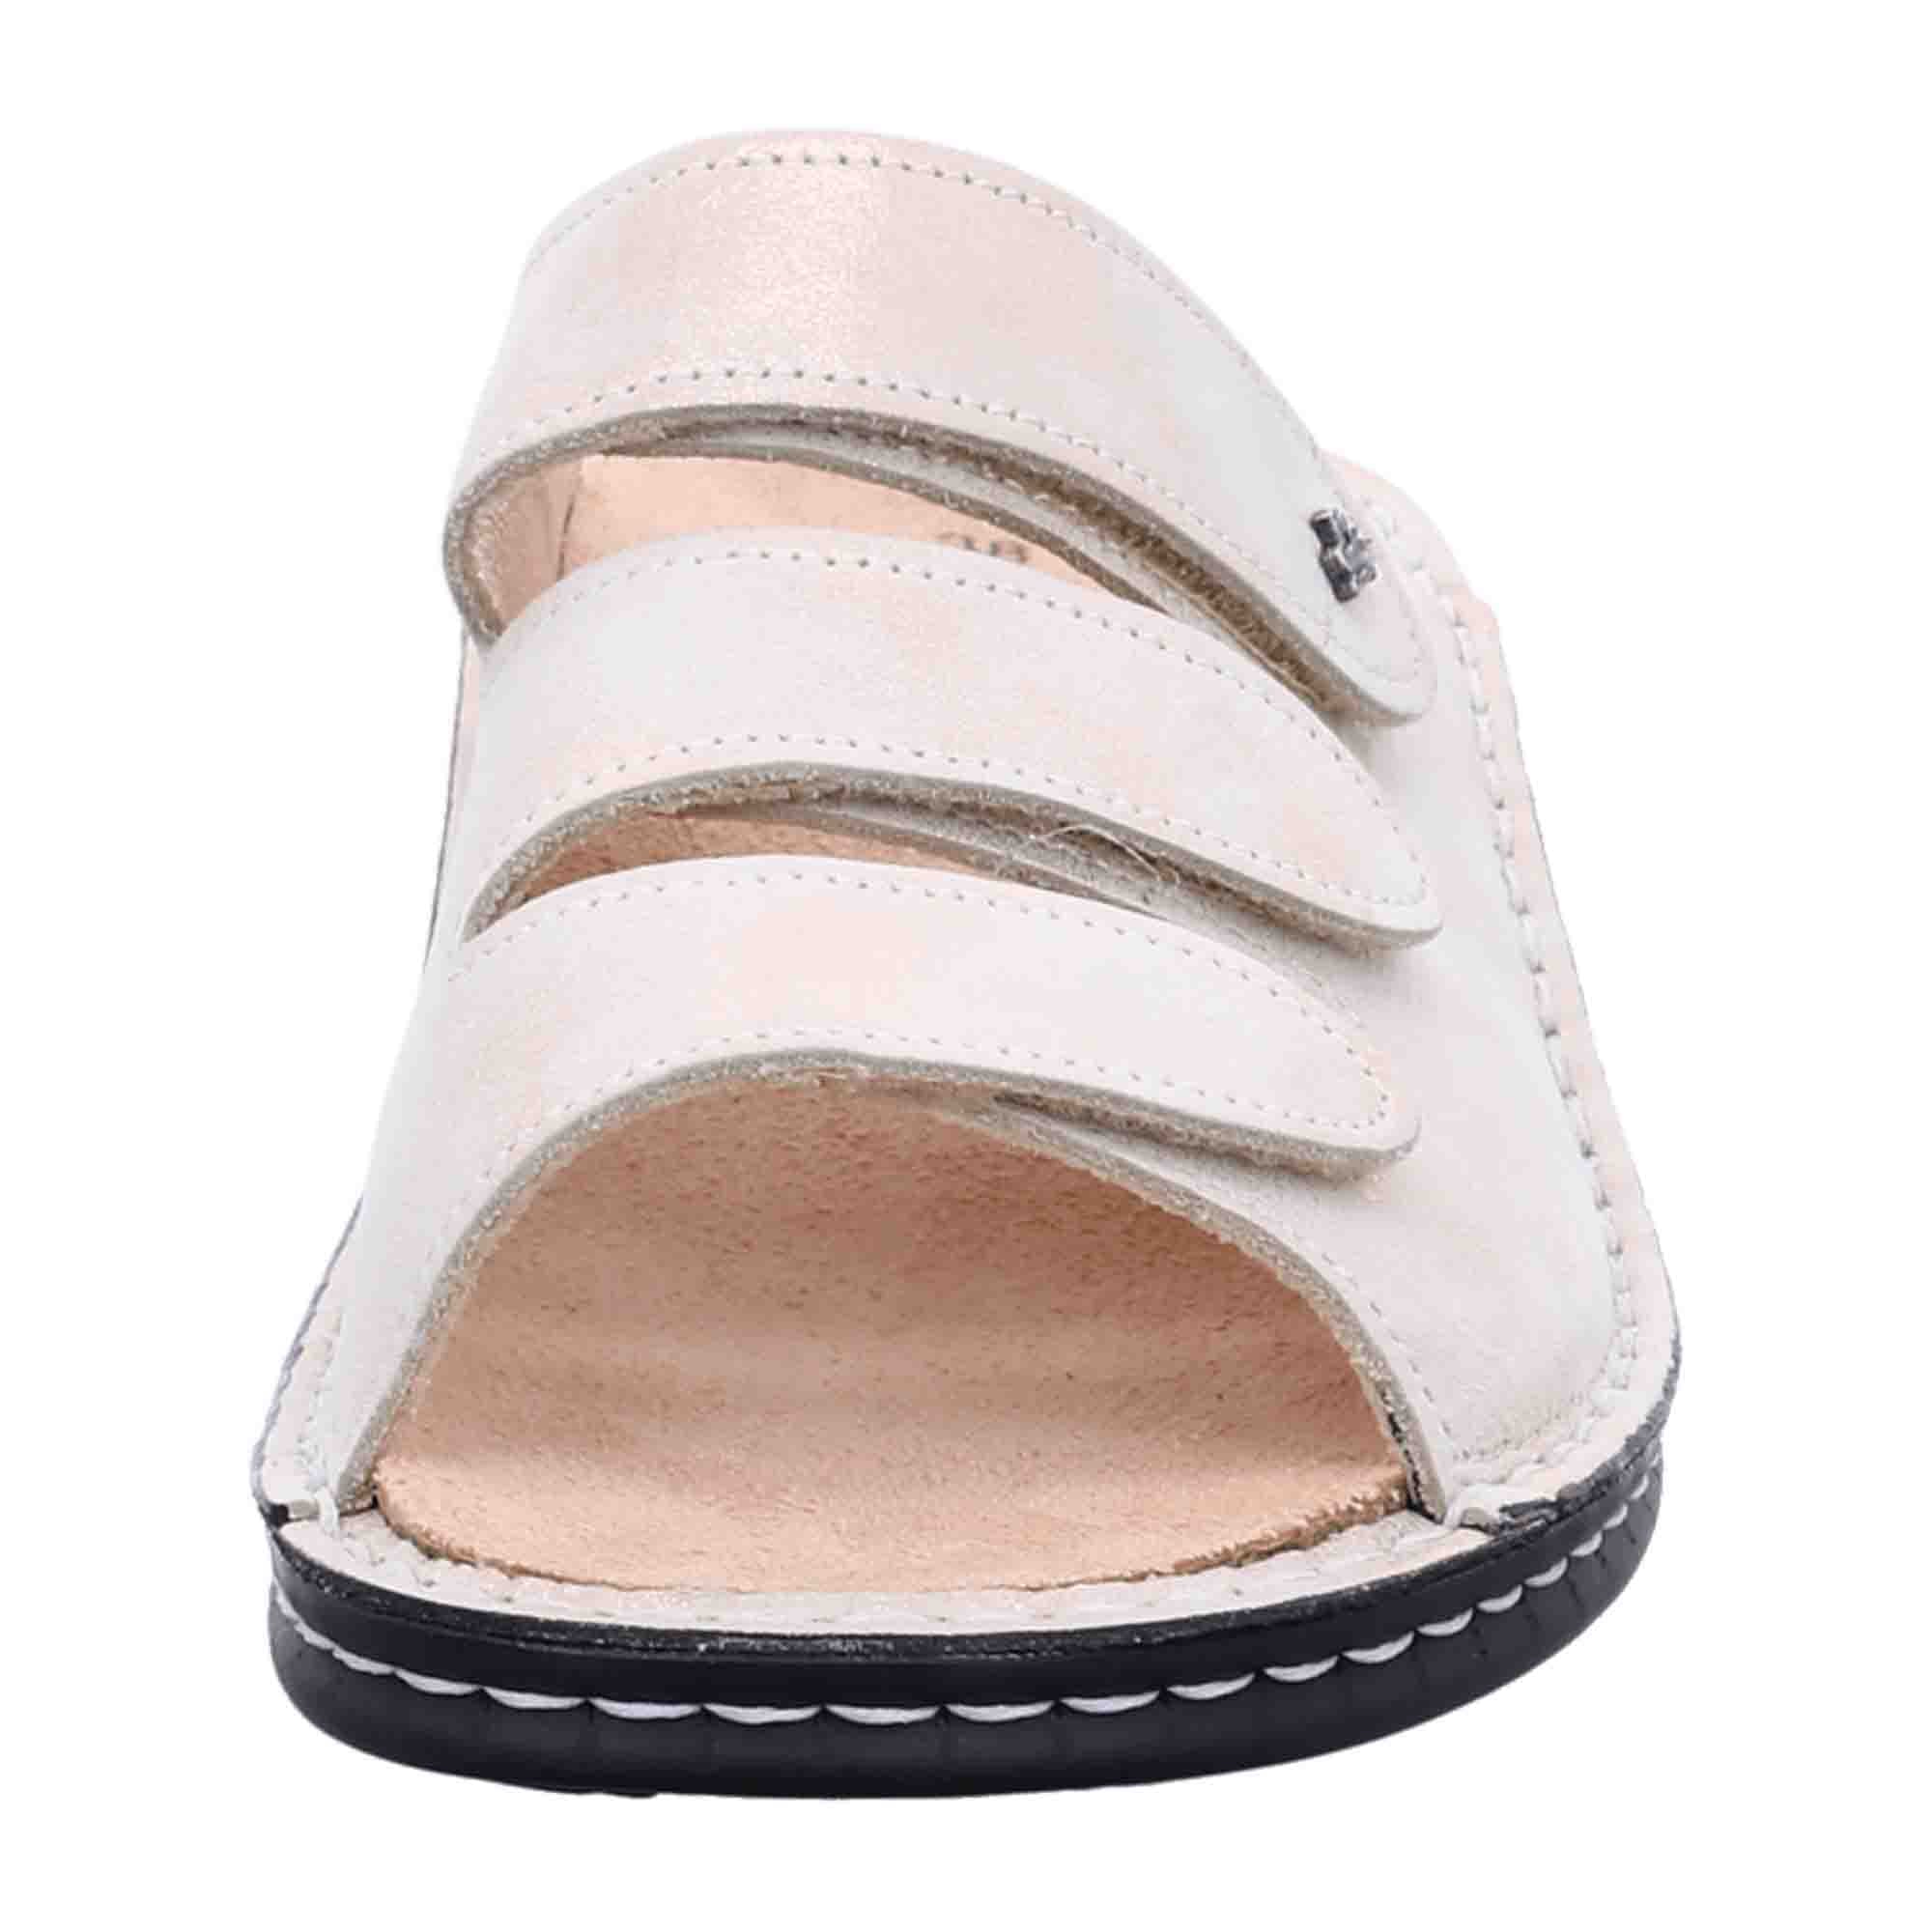 Finn Comfort Hellas Women's Slides - Beige Champagne Nuvola, Comfortable Leather Sandals with Removable Insoles